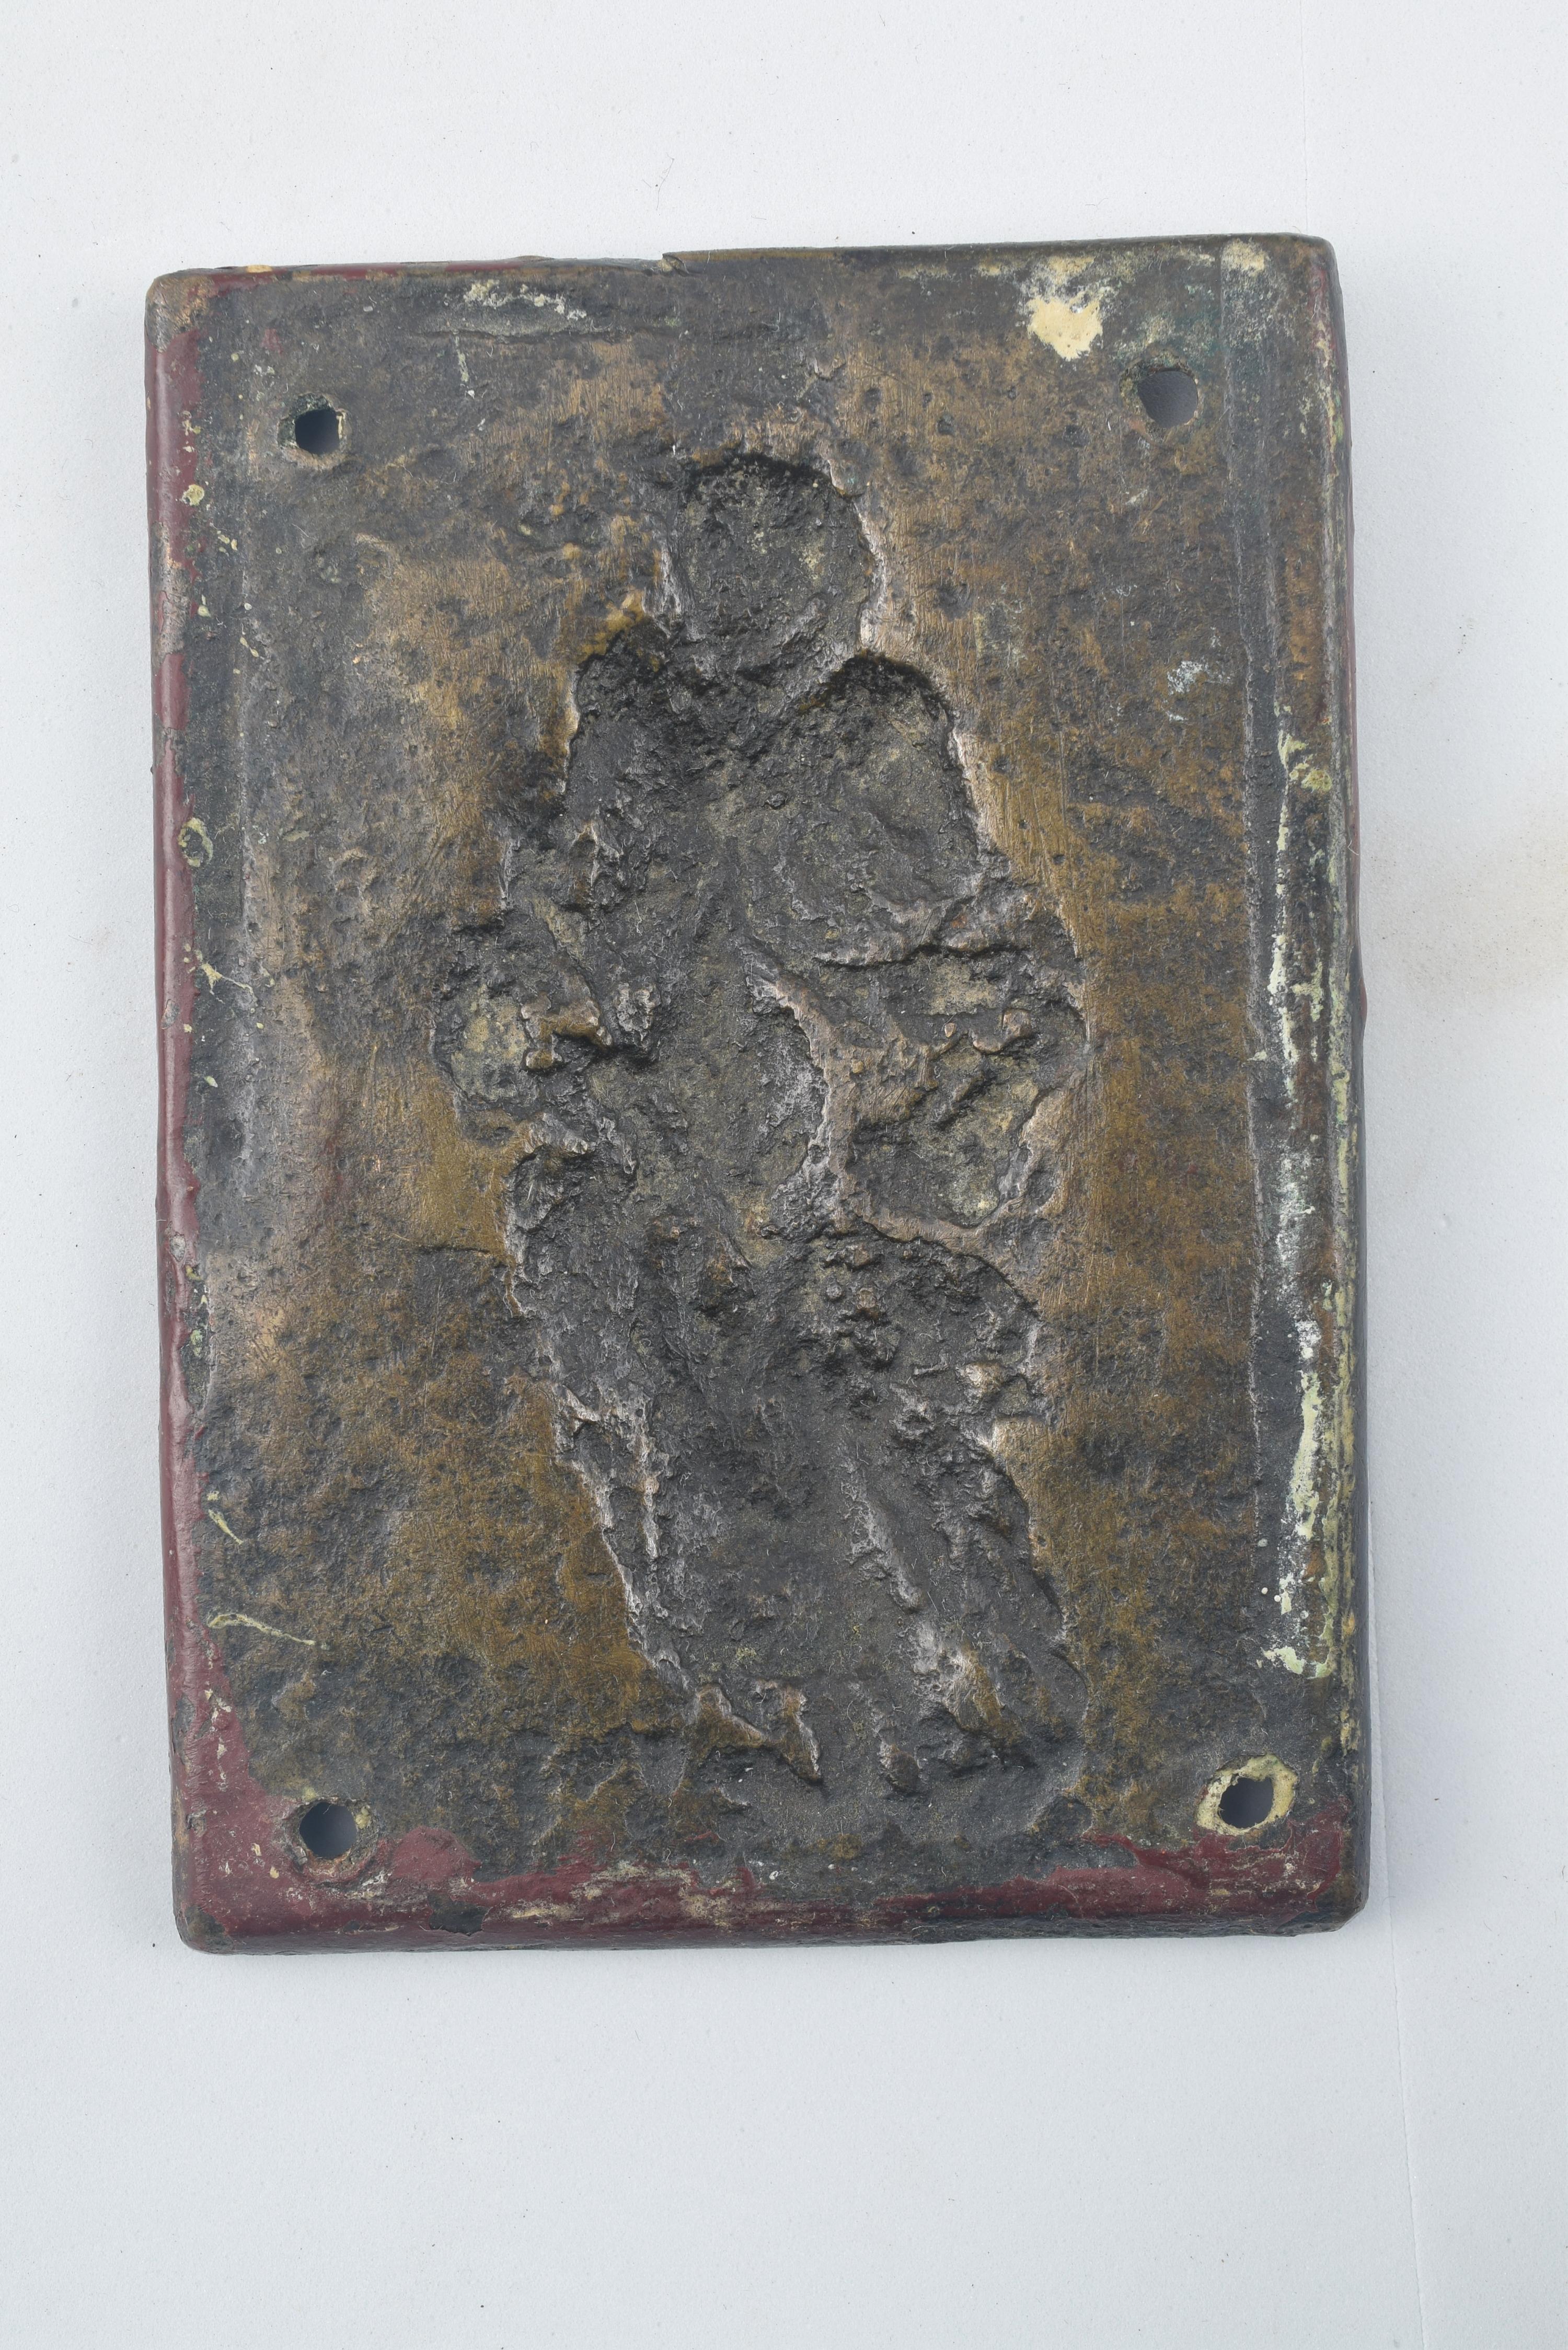 Devotional plaque, Saint Dominic. Bronze. Spanish school, 19th century. 
Devotional plate with a rectangular shape and made of bronze that has four holes in it and a figurative relief enhanced with a frame of smooth moldings. You can see a saint